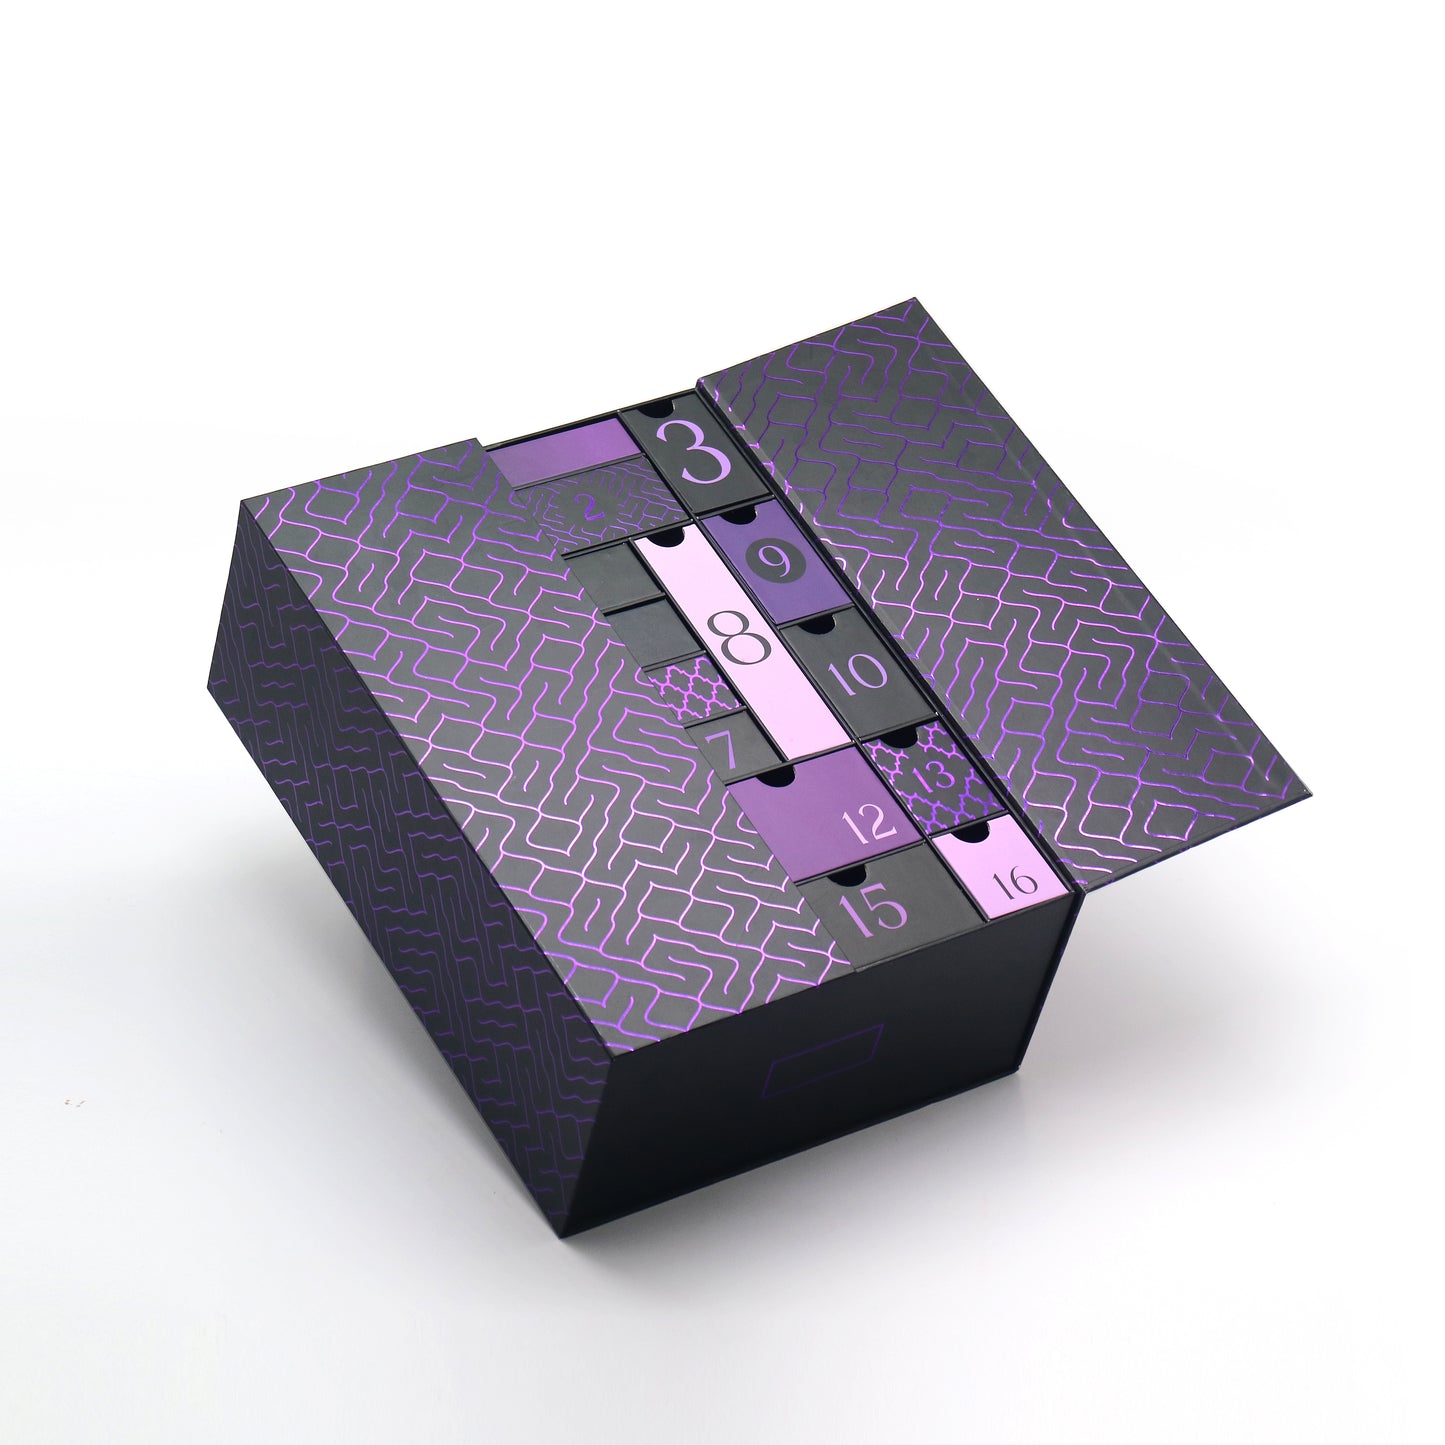 AVUX 16 Drawers Empty Gift Box for Gifts Holding- A Purple Colored Rigid Card Board Gift Box with Laser Printed – A Luxury Gift Box for Men and Women for Birthday Parties, Weeding, and Christmas